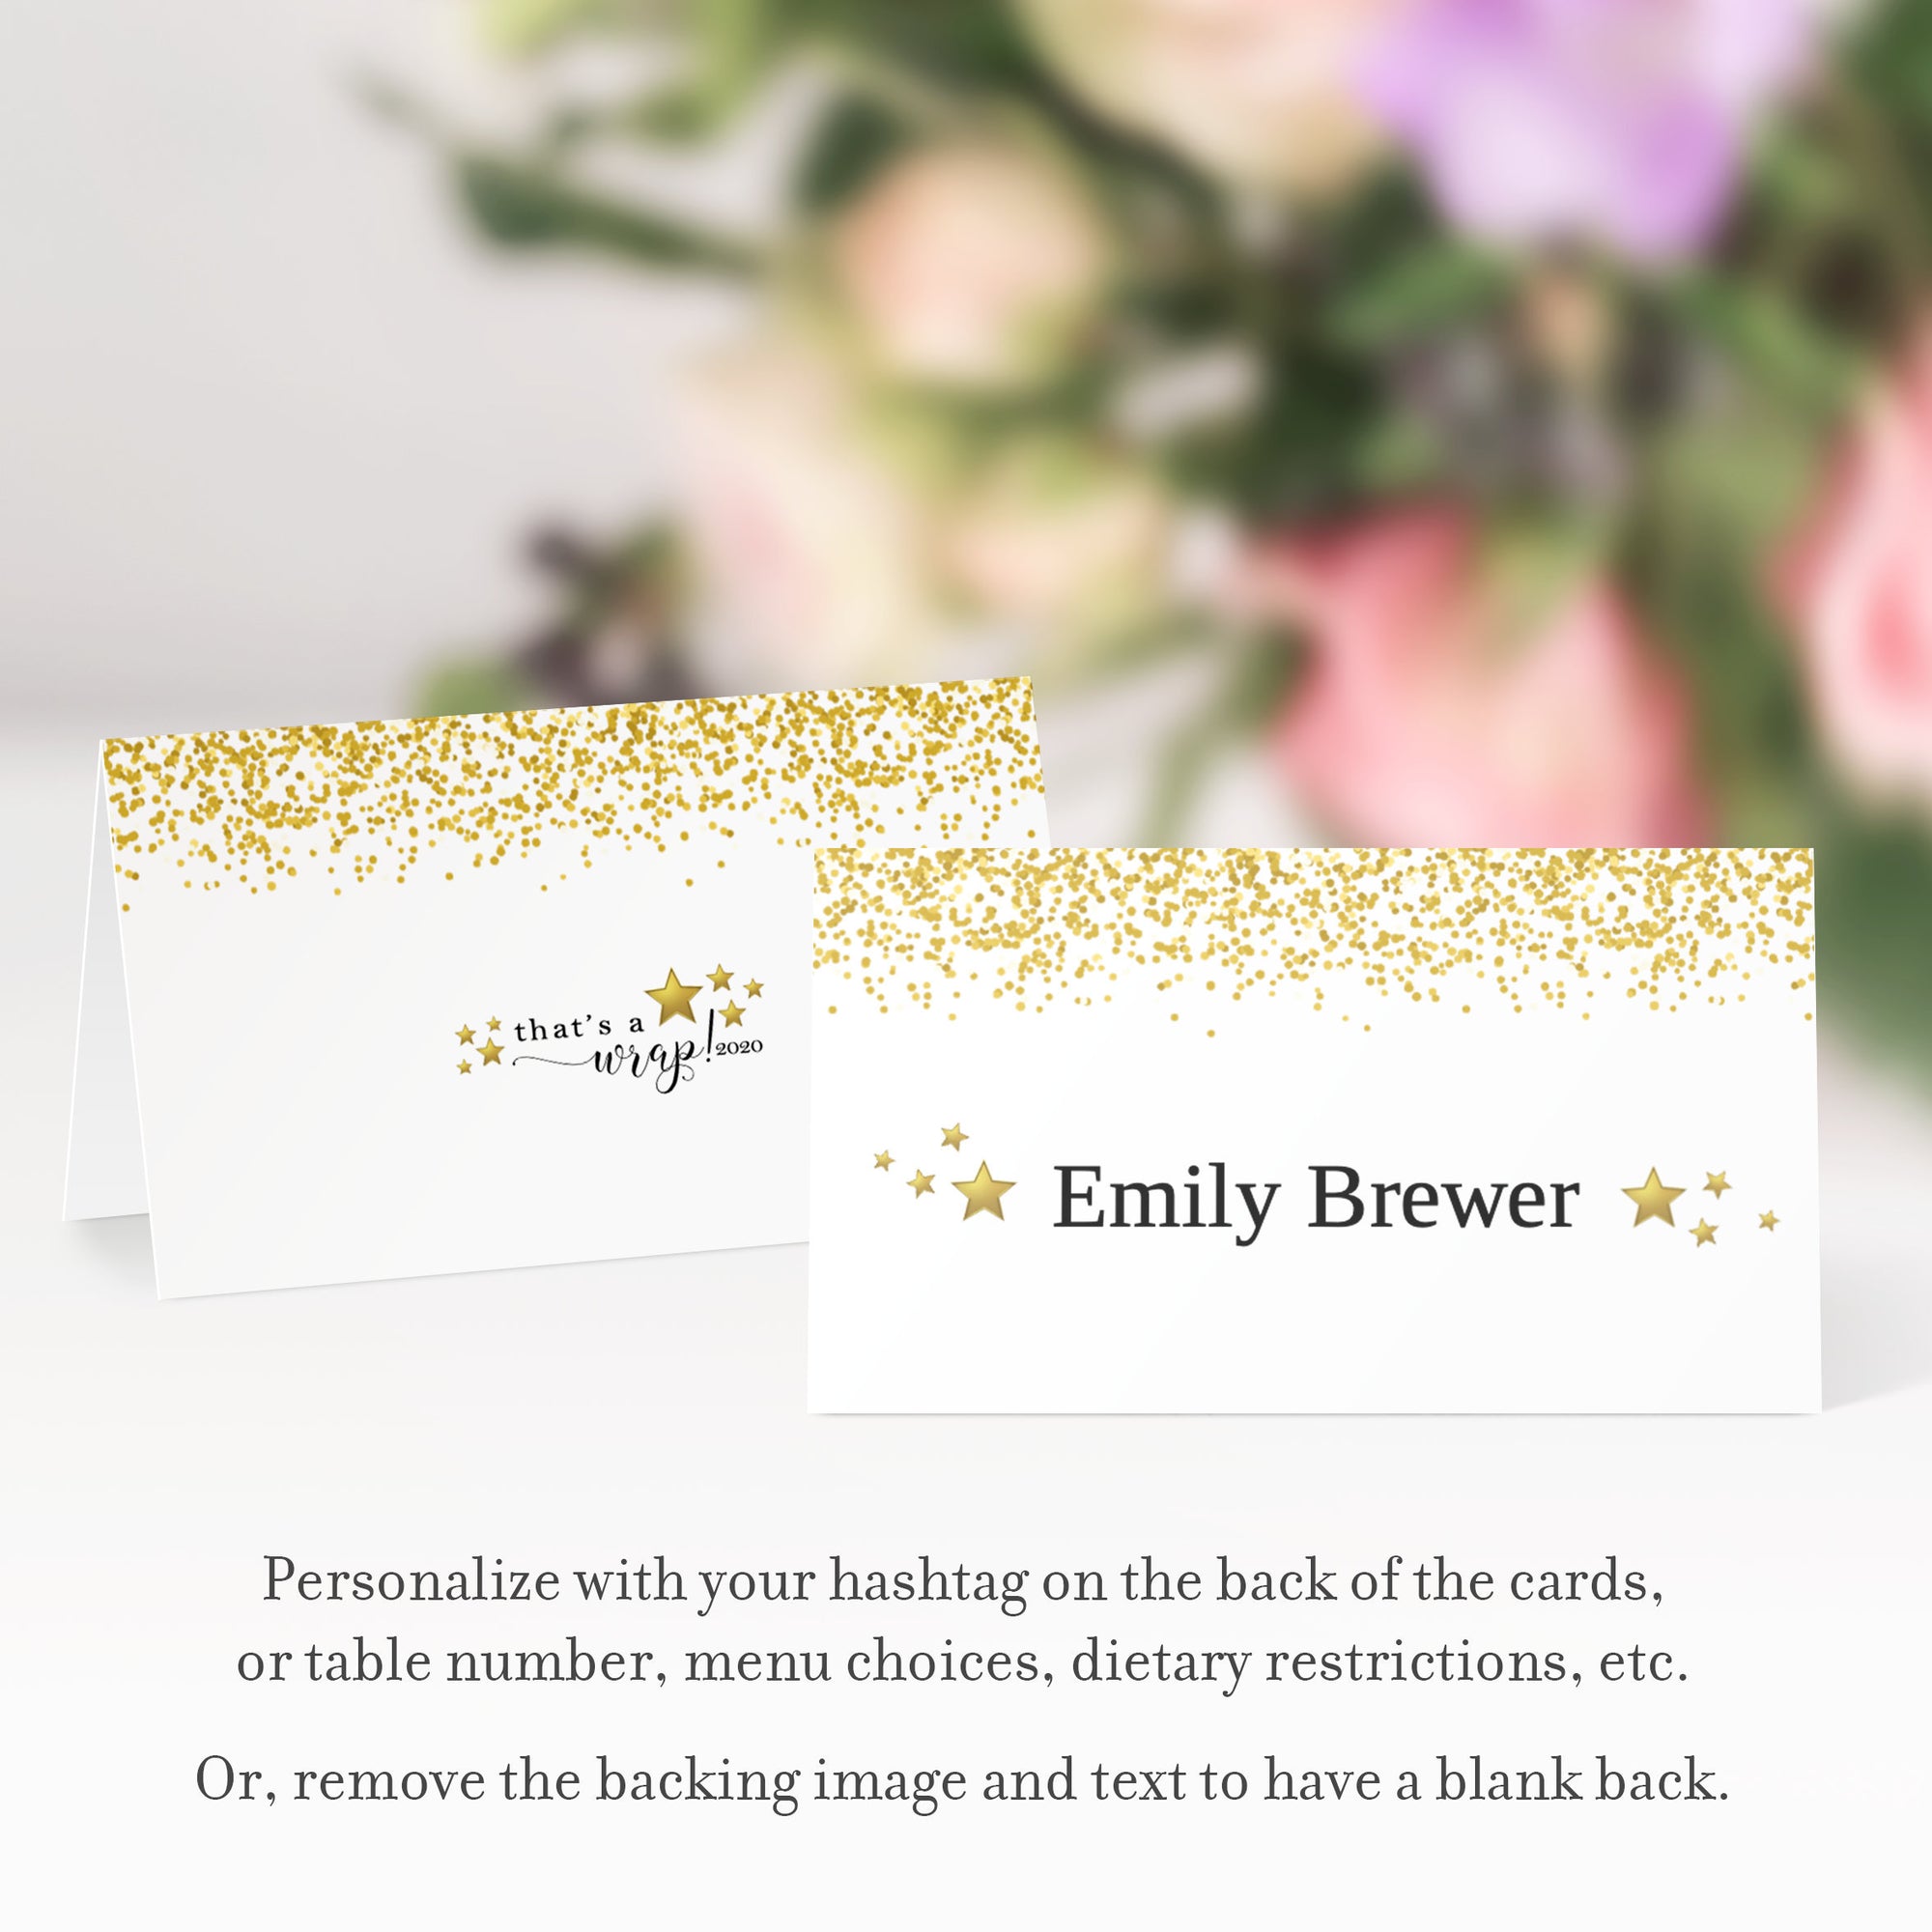 New Years Eve Place Cards Template, Printable New Years Eve Name Cards -  PlumPolkaDot